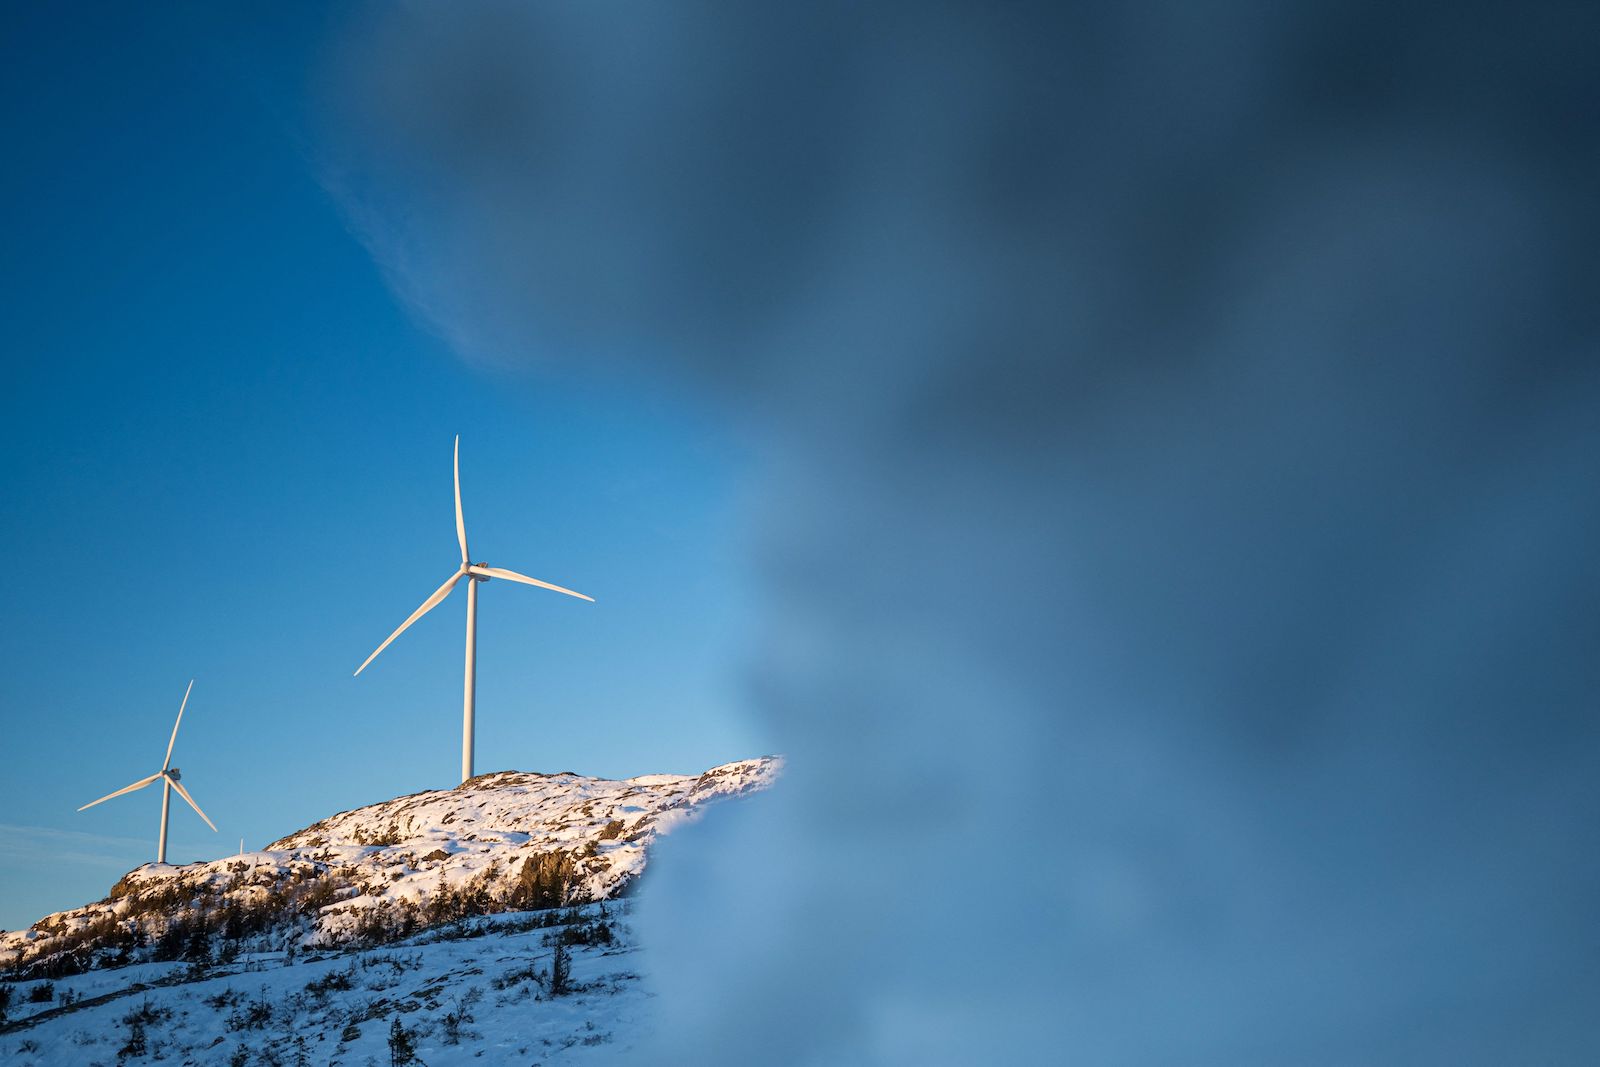 fog obscures wind turbines on a snowy hill